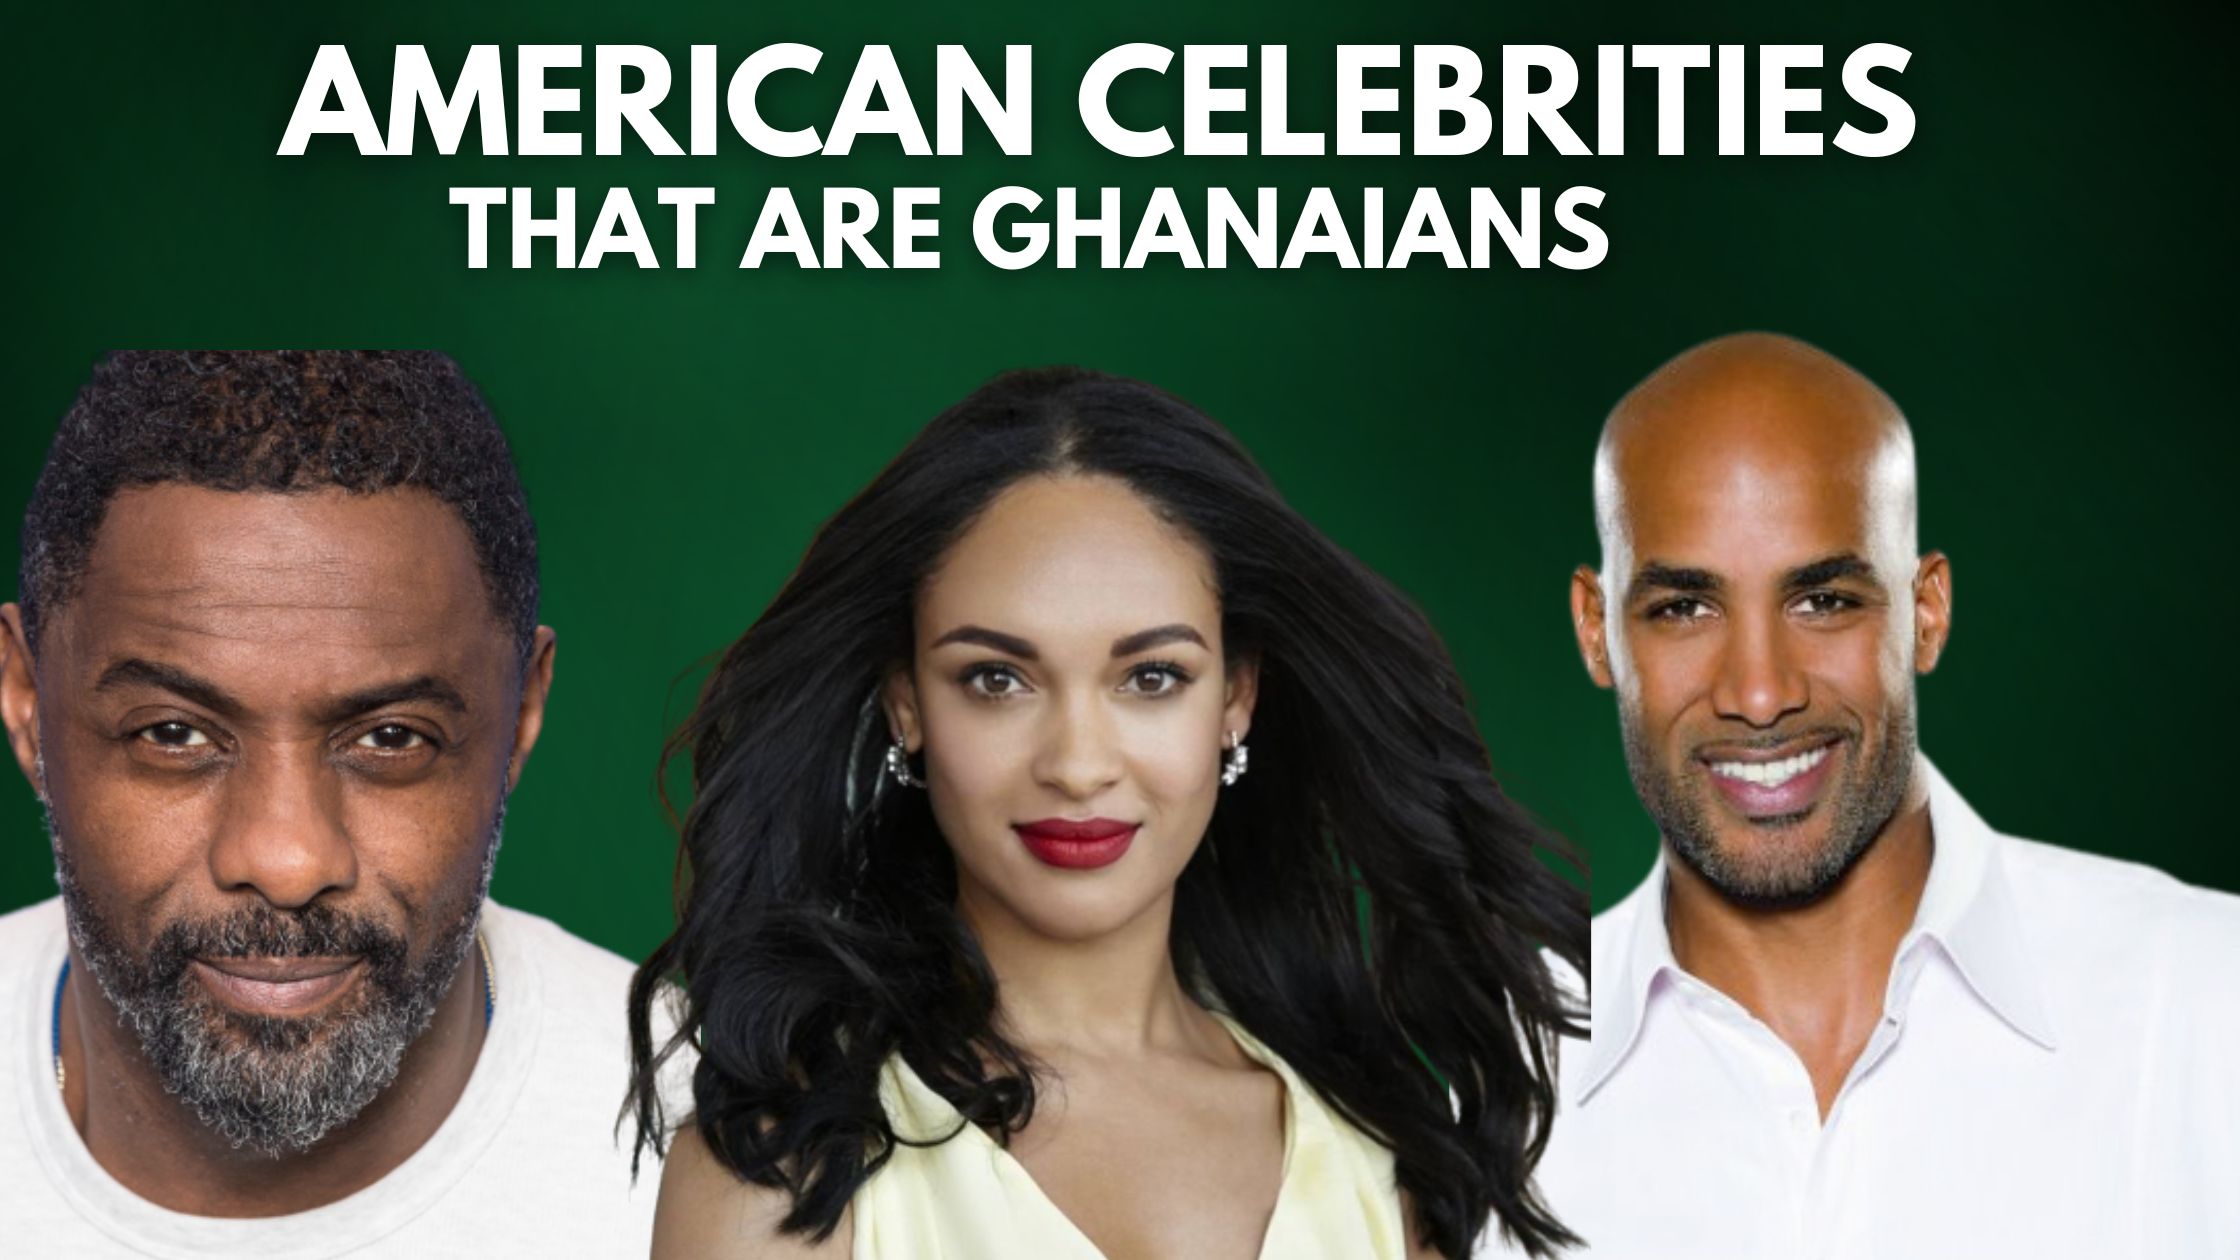 Top 5 American Celebrities That Are Ghanaians